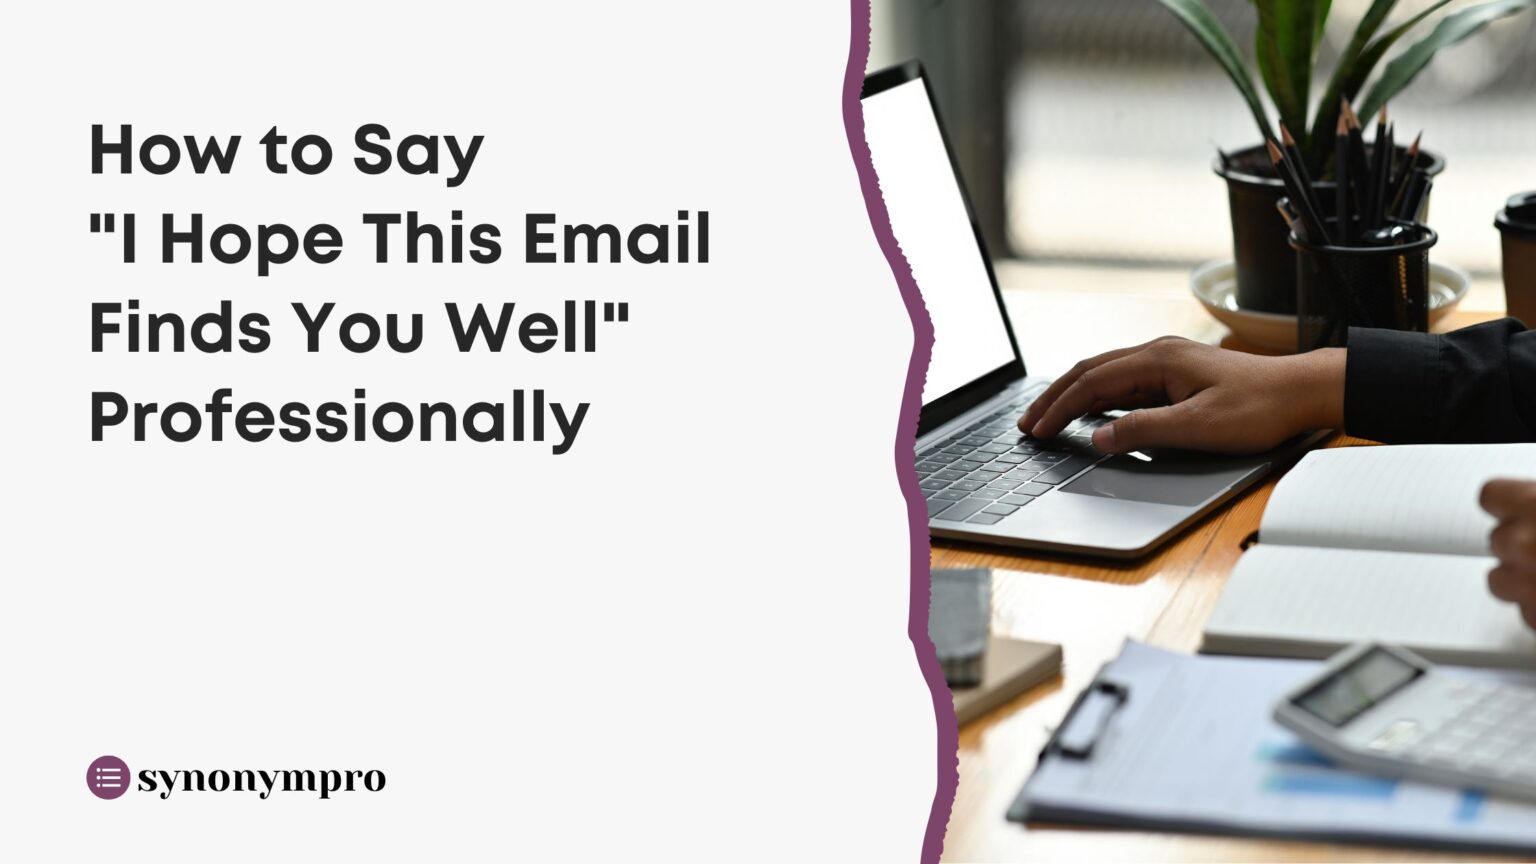 Another Way to Say “I Hope This Email Finds You Well” - SynonymPro